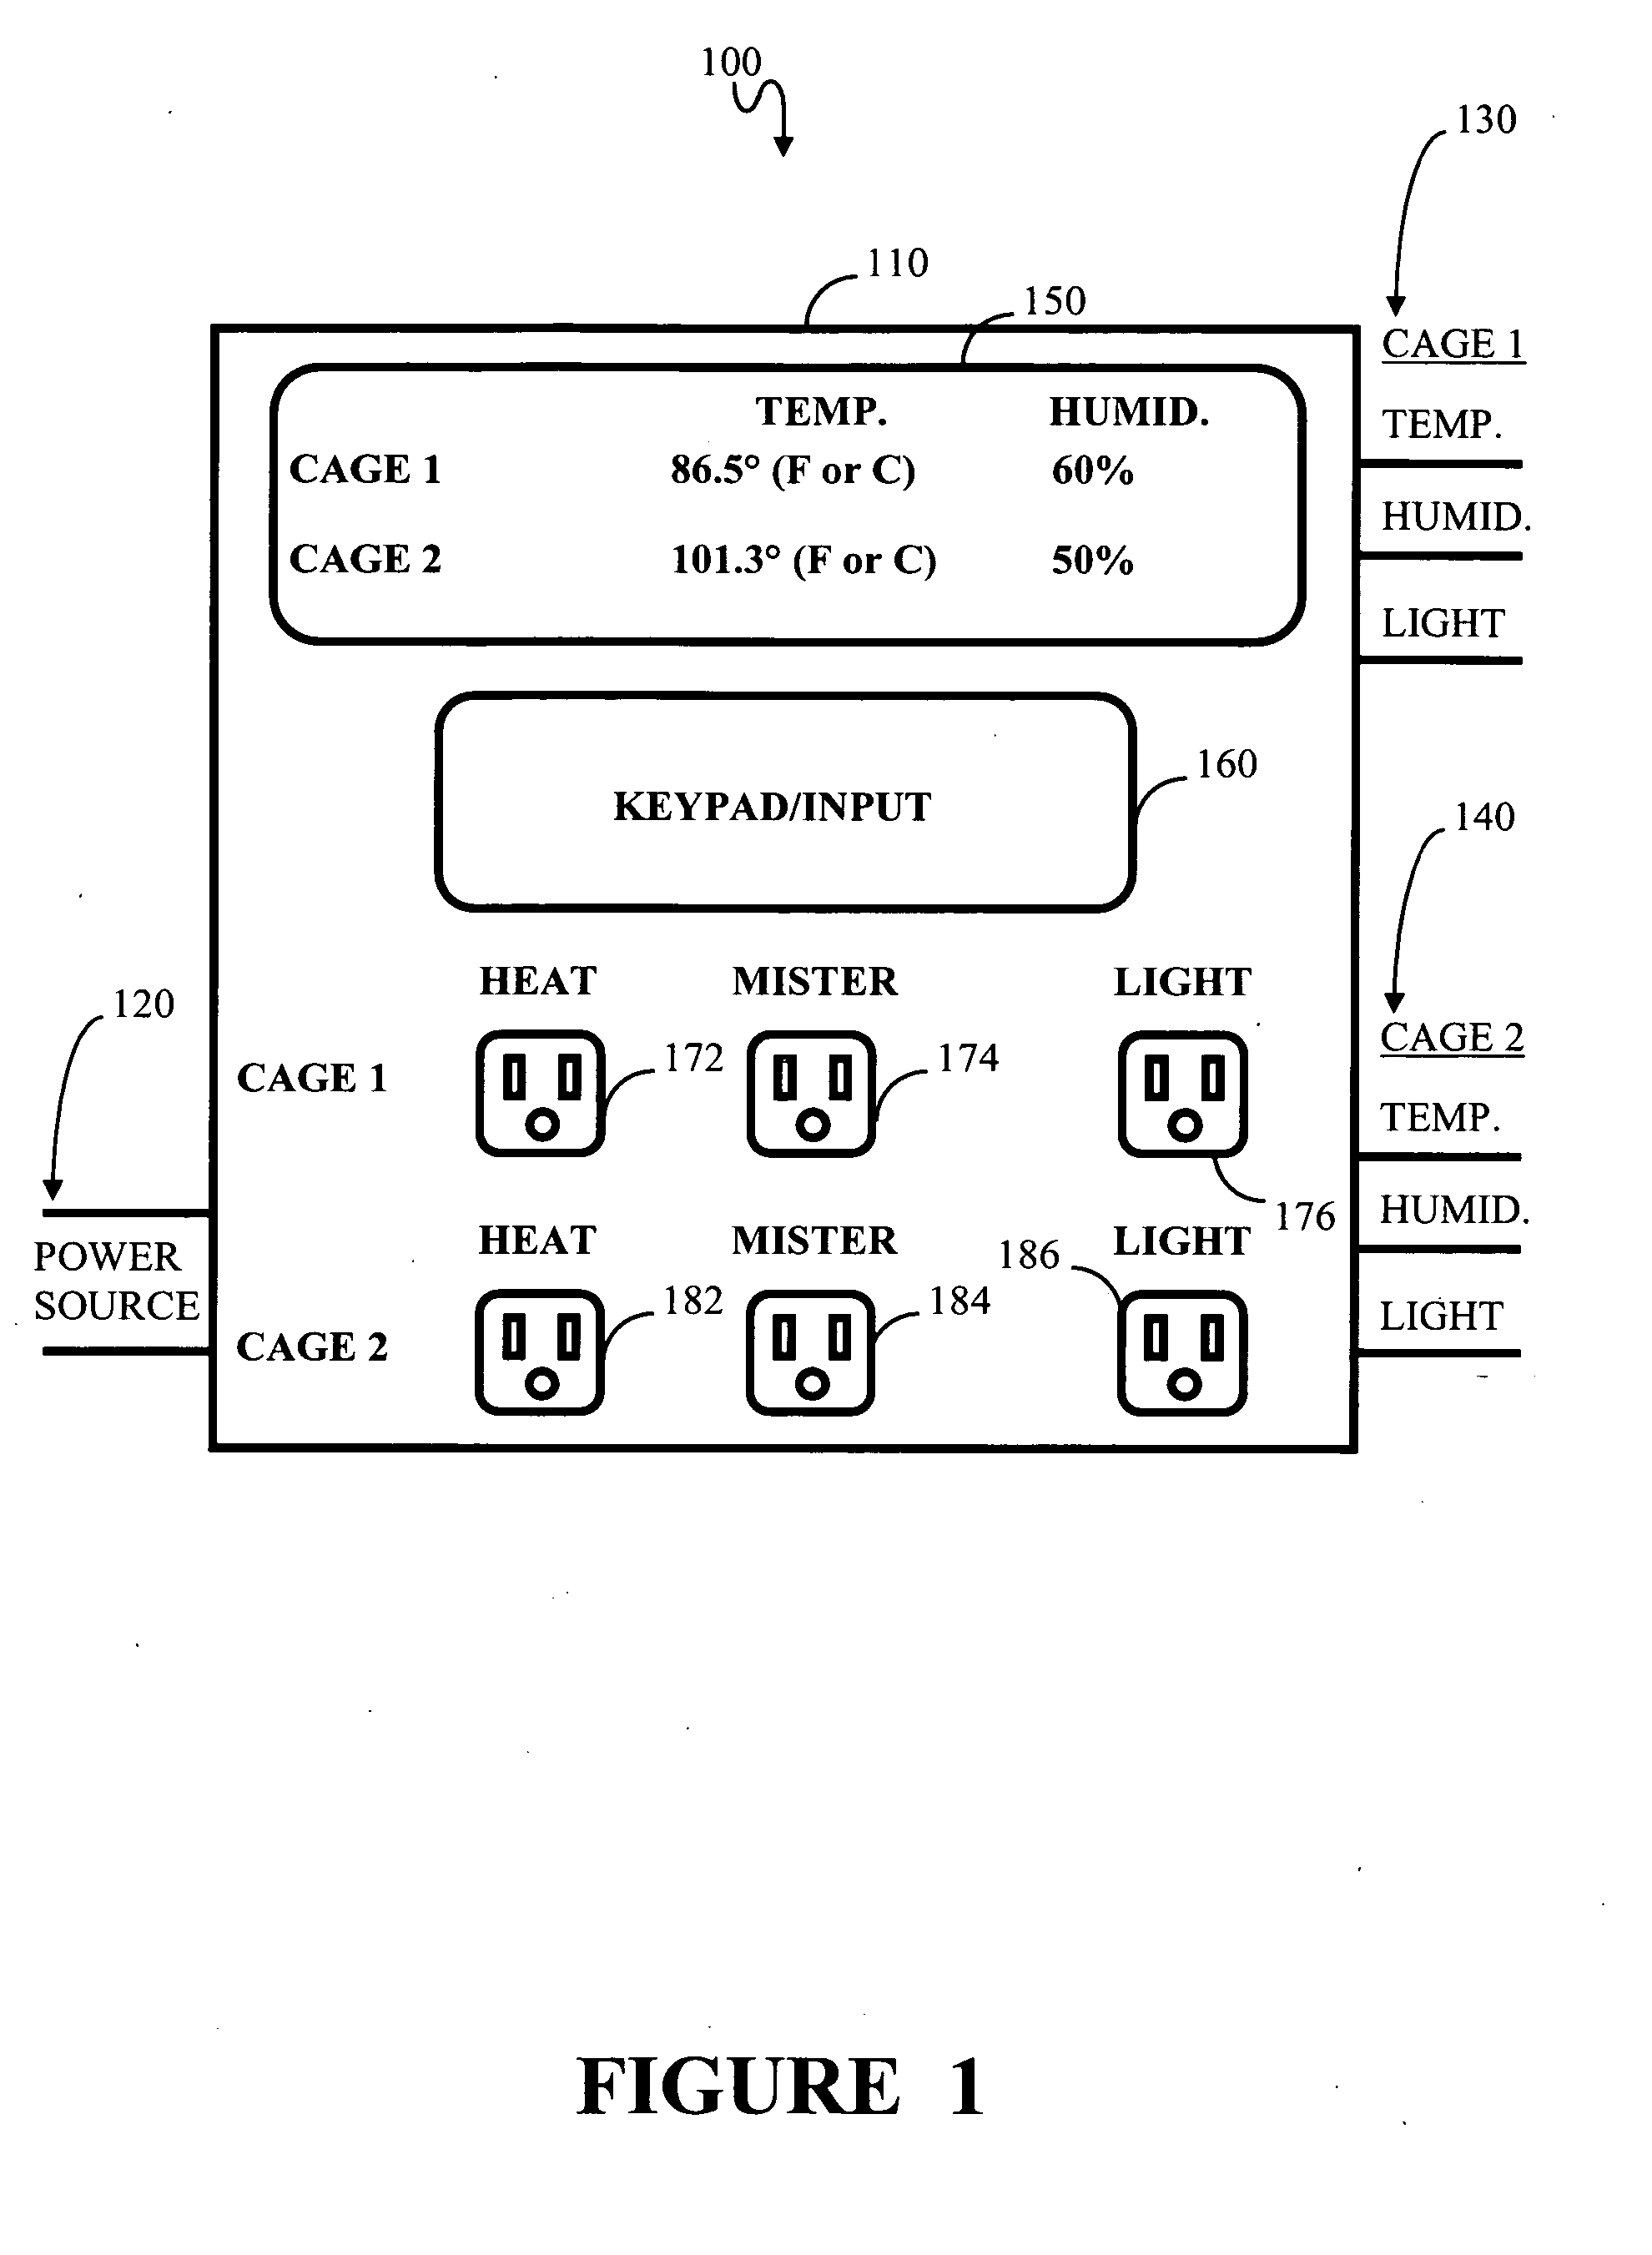 Apparatus for remotely controlling the environment of multiple animal cages